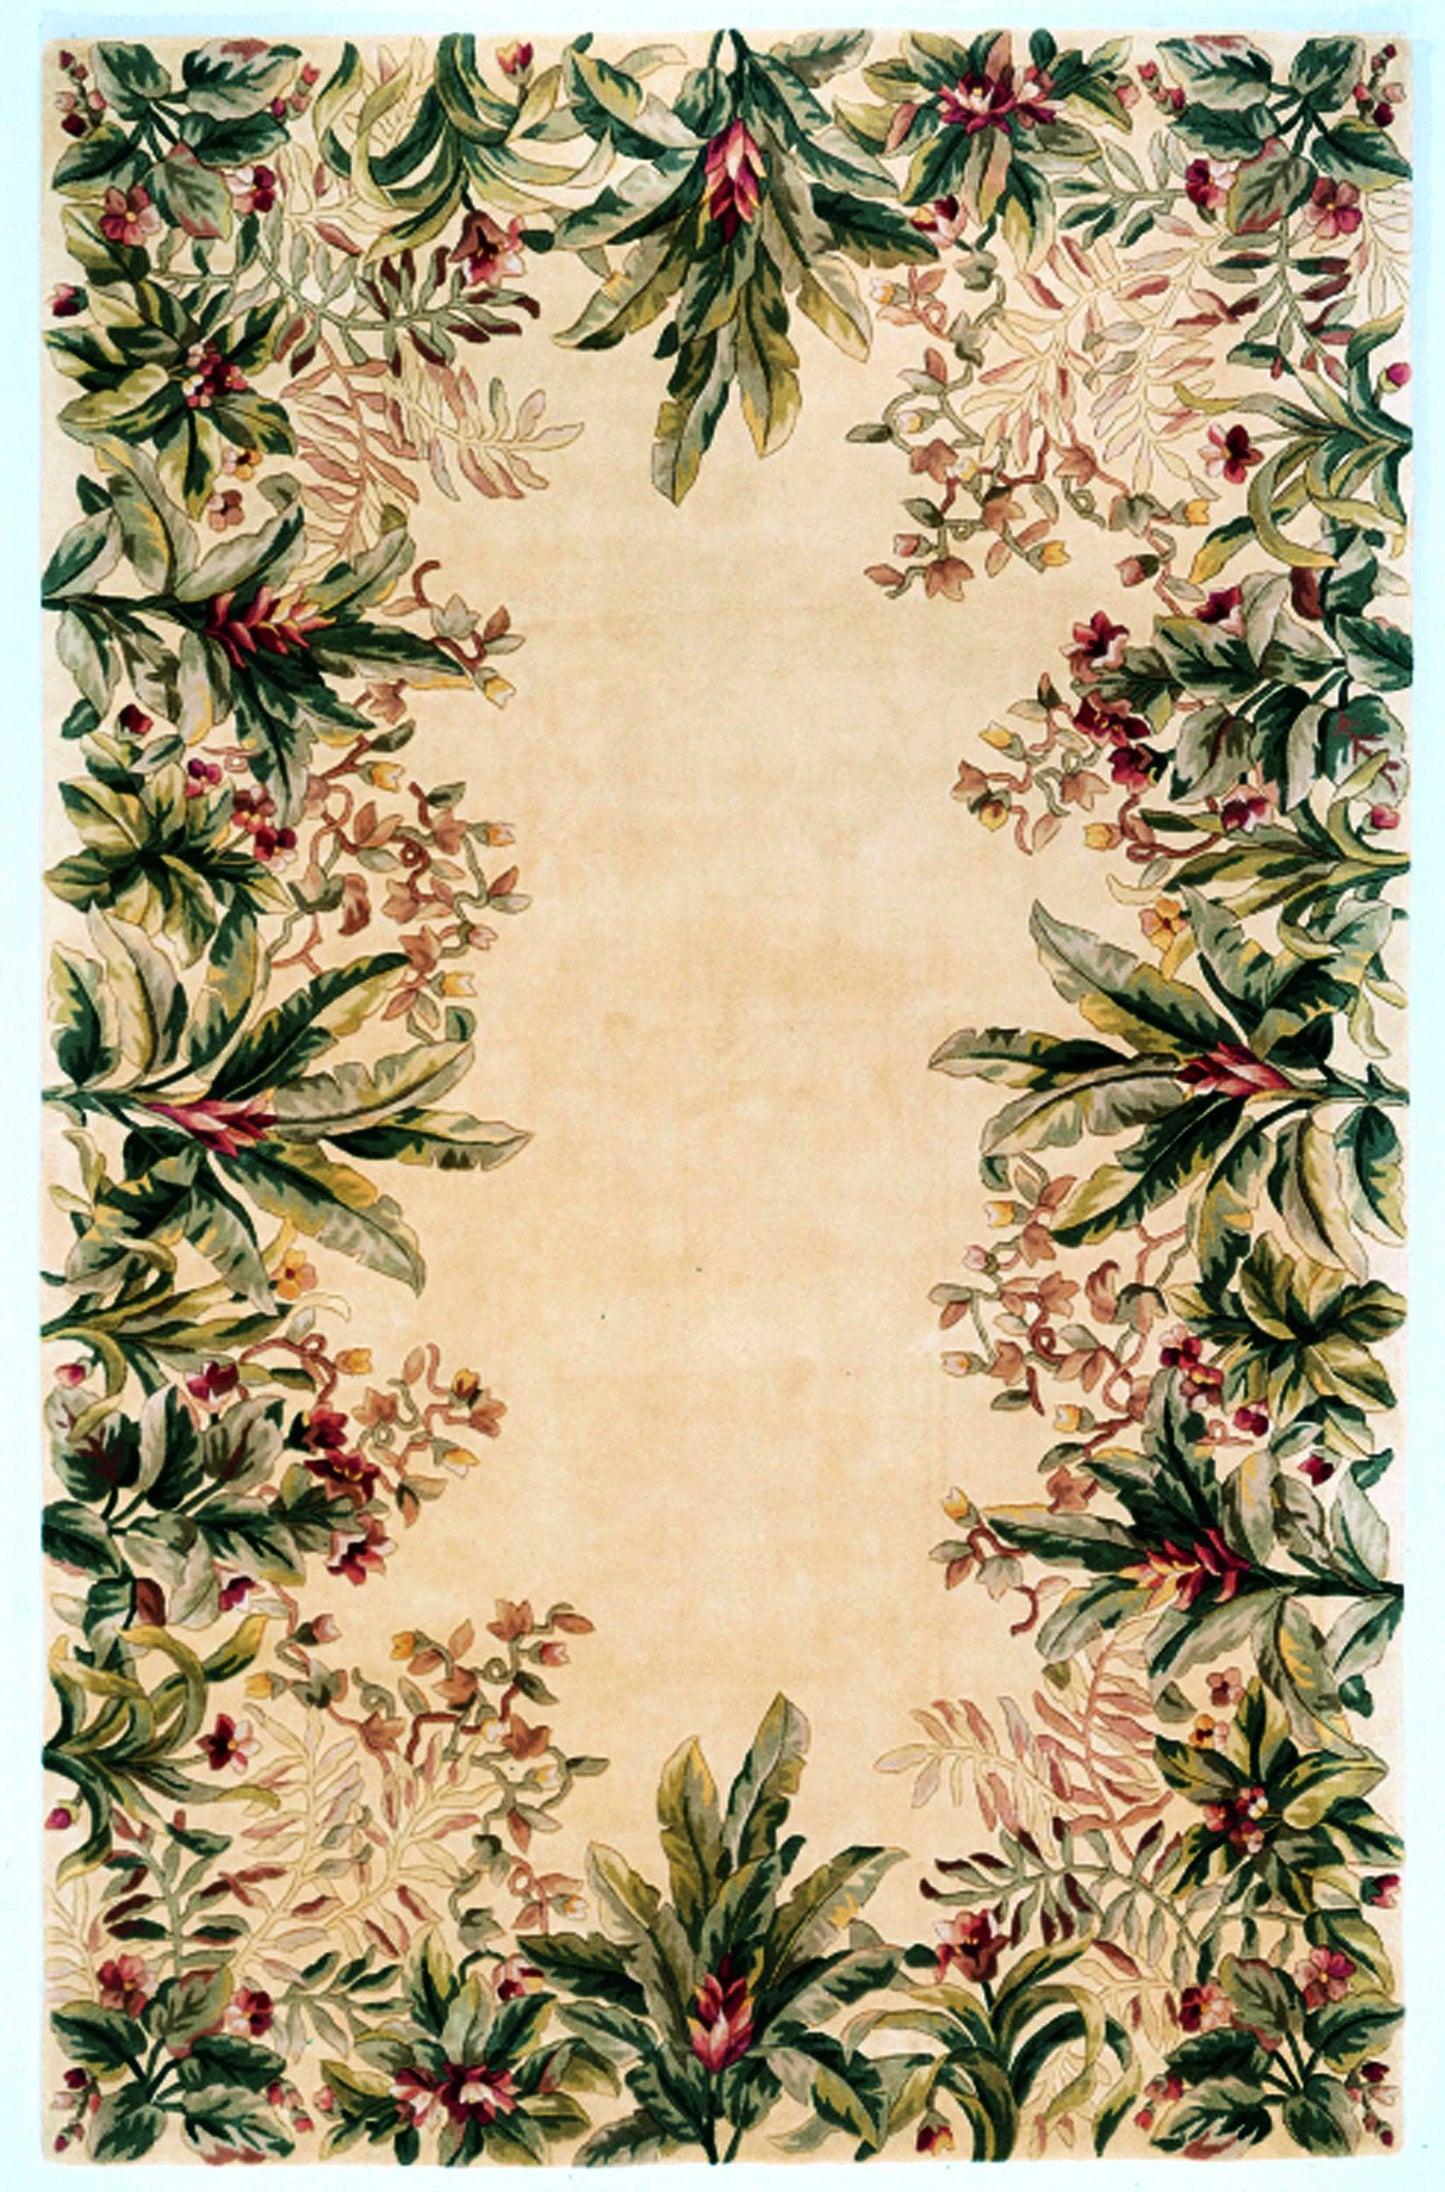 8' Ivory Wool Tropical Floral Hand Tufted Runner Rug